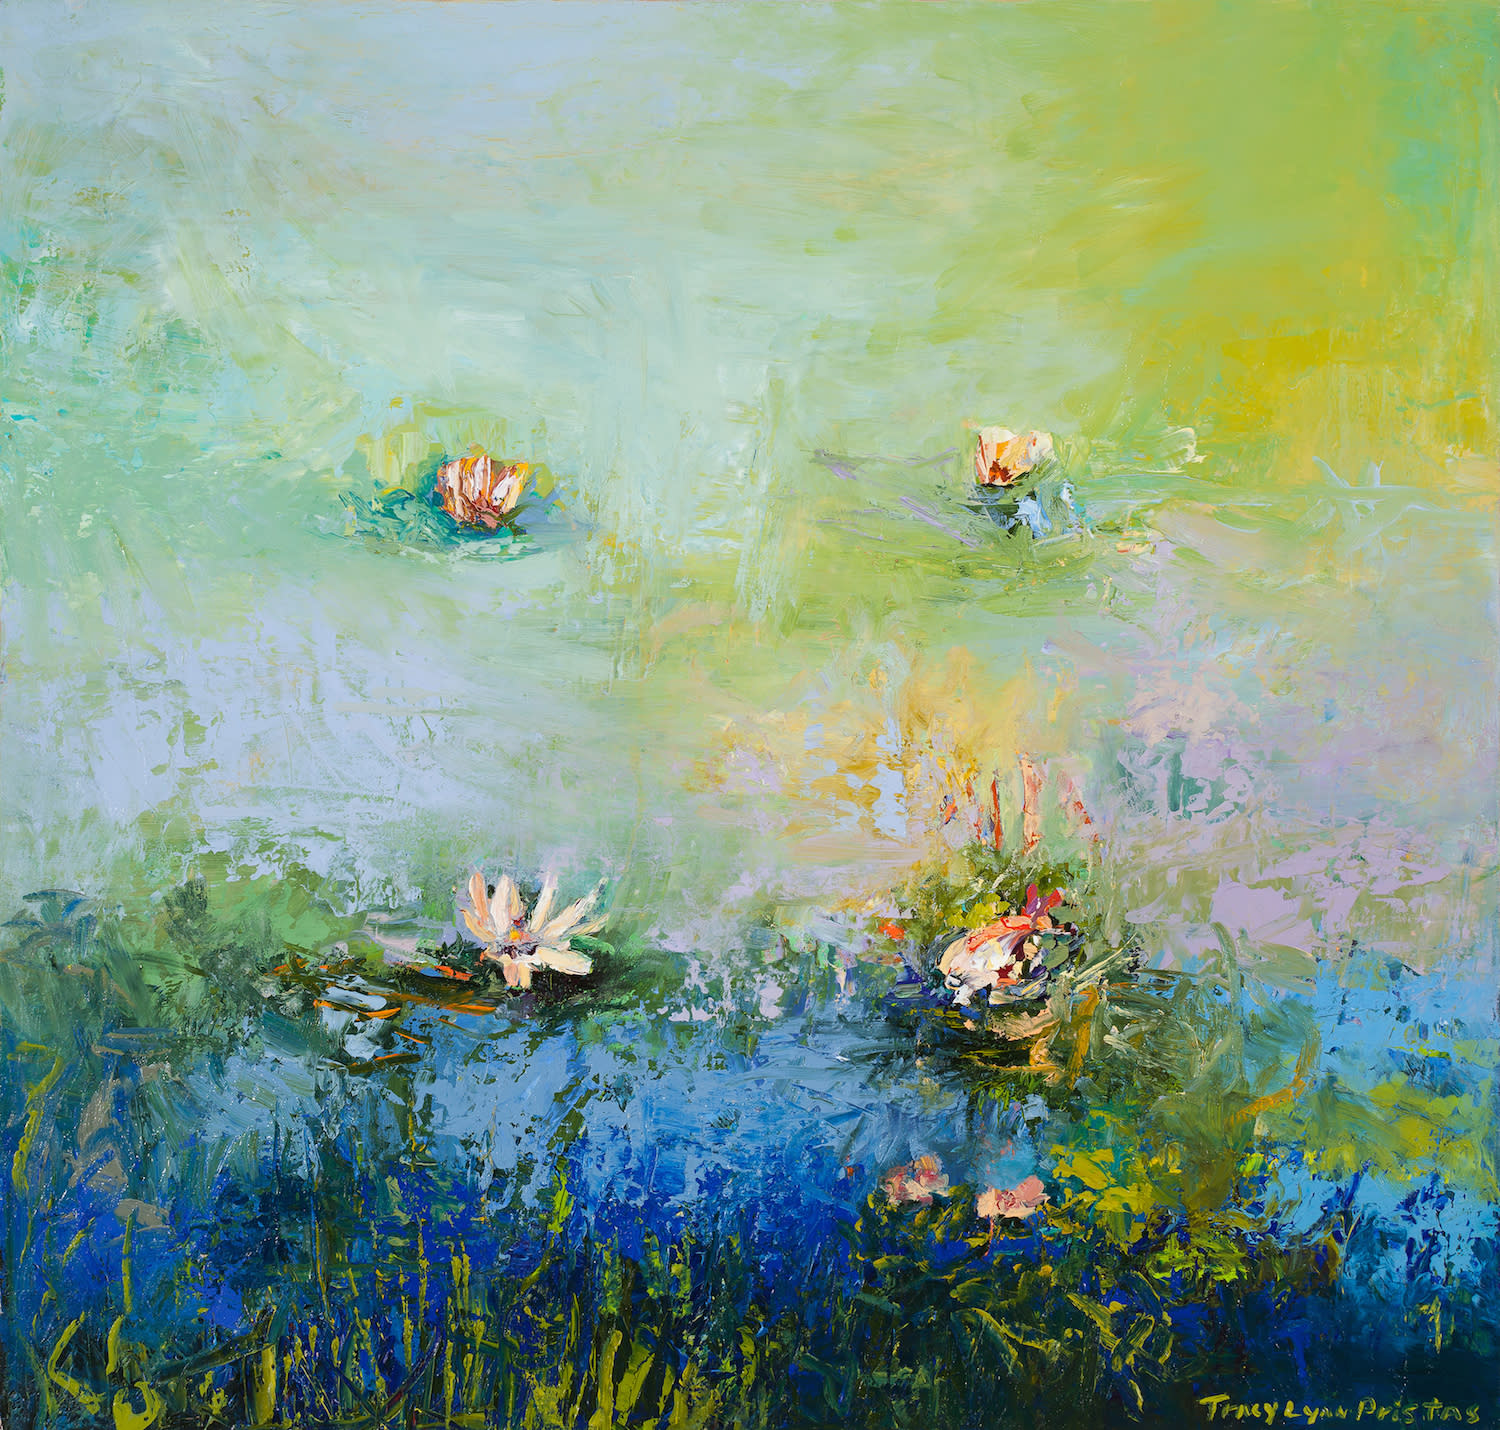 Lotus paintings by tracy lynn pristas sold serene influence e6pwtk